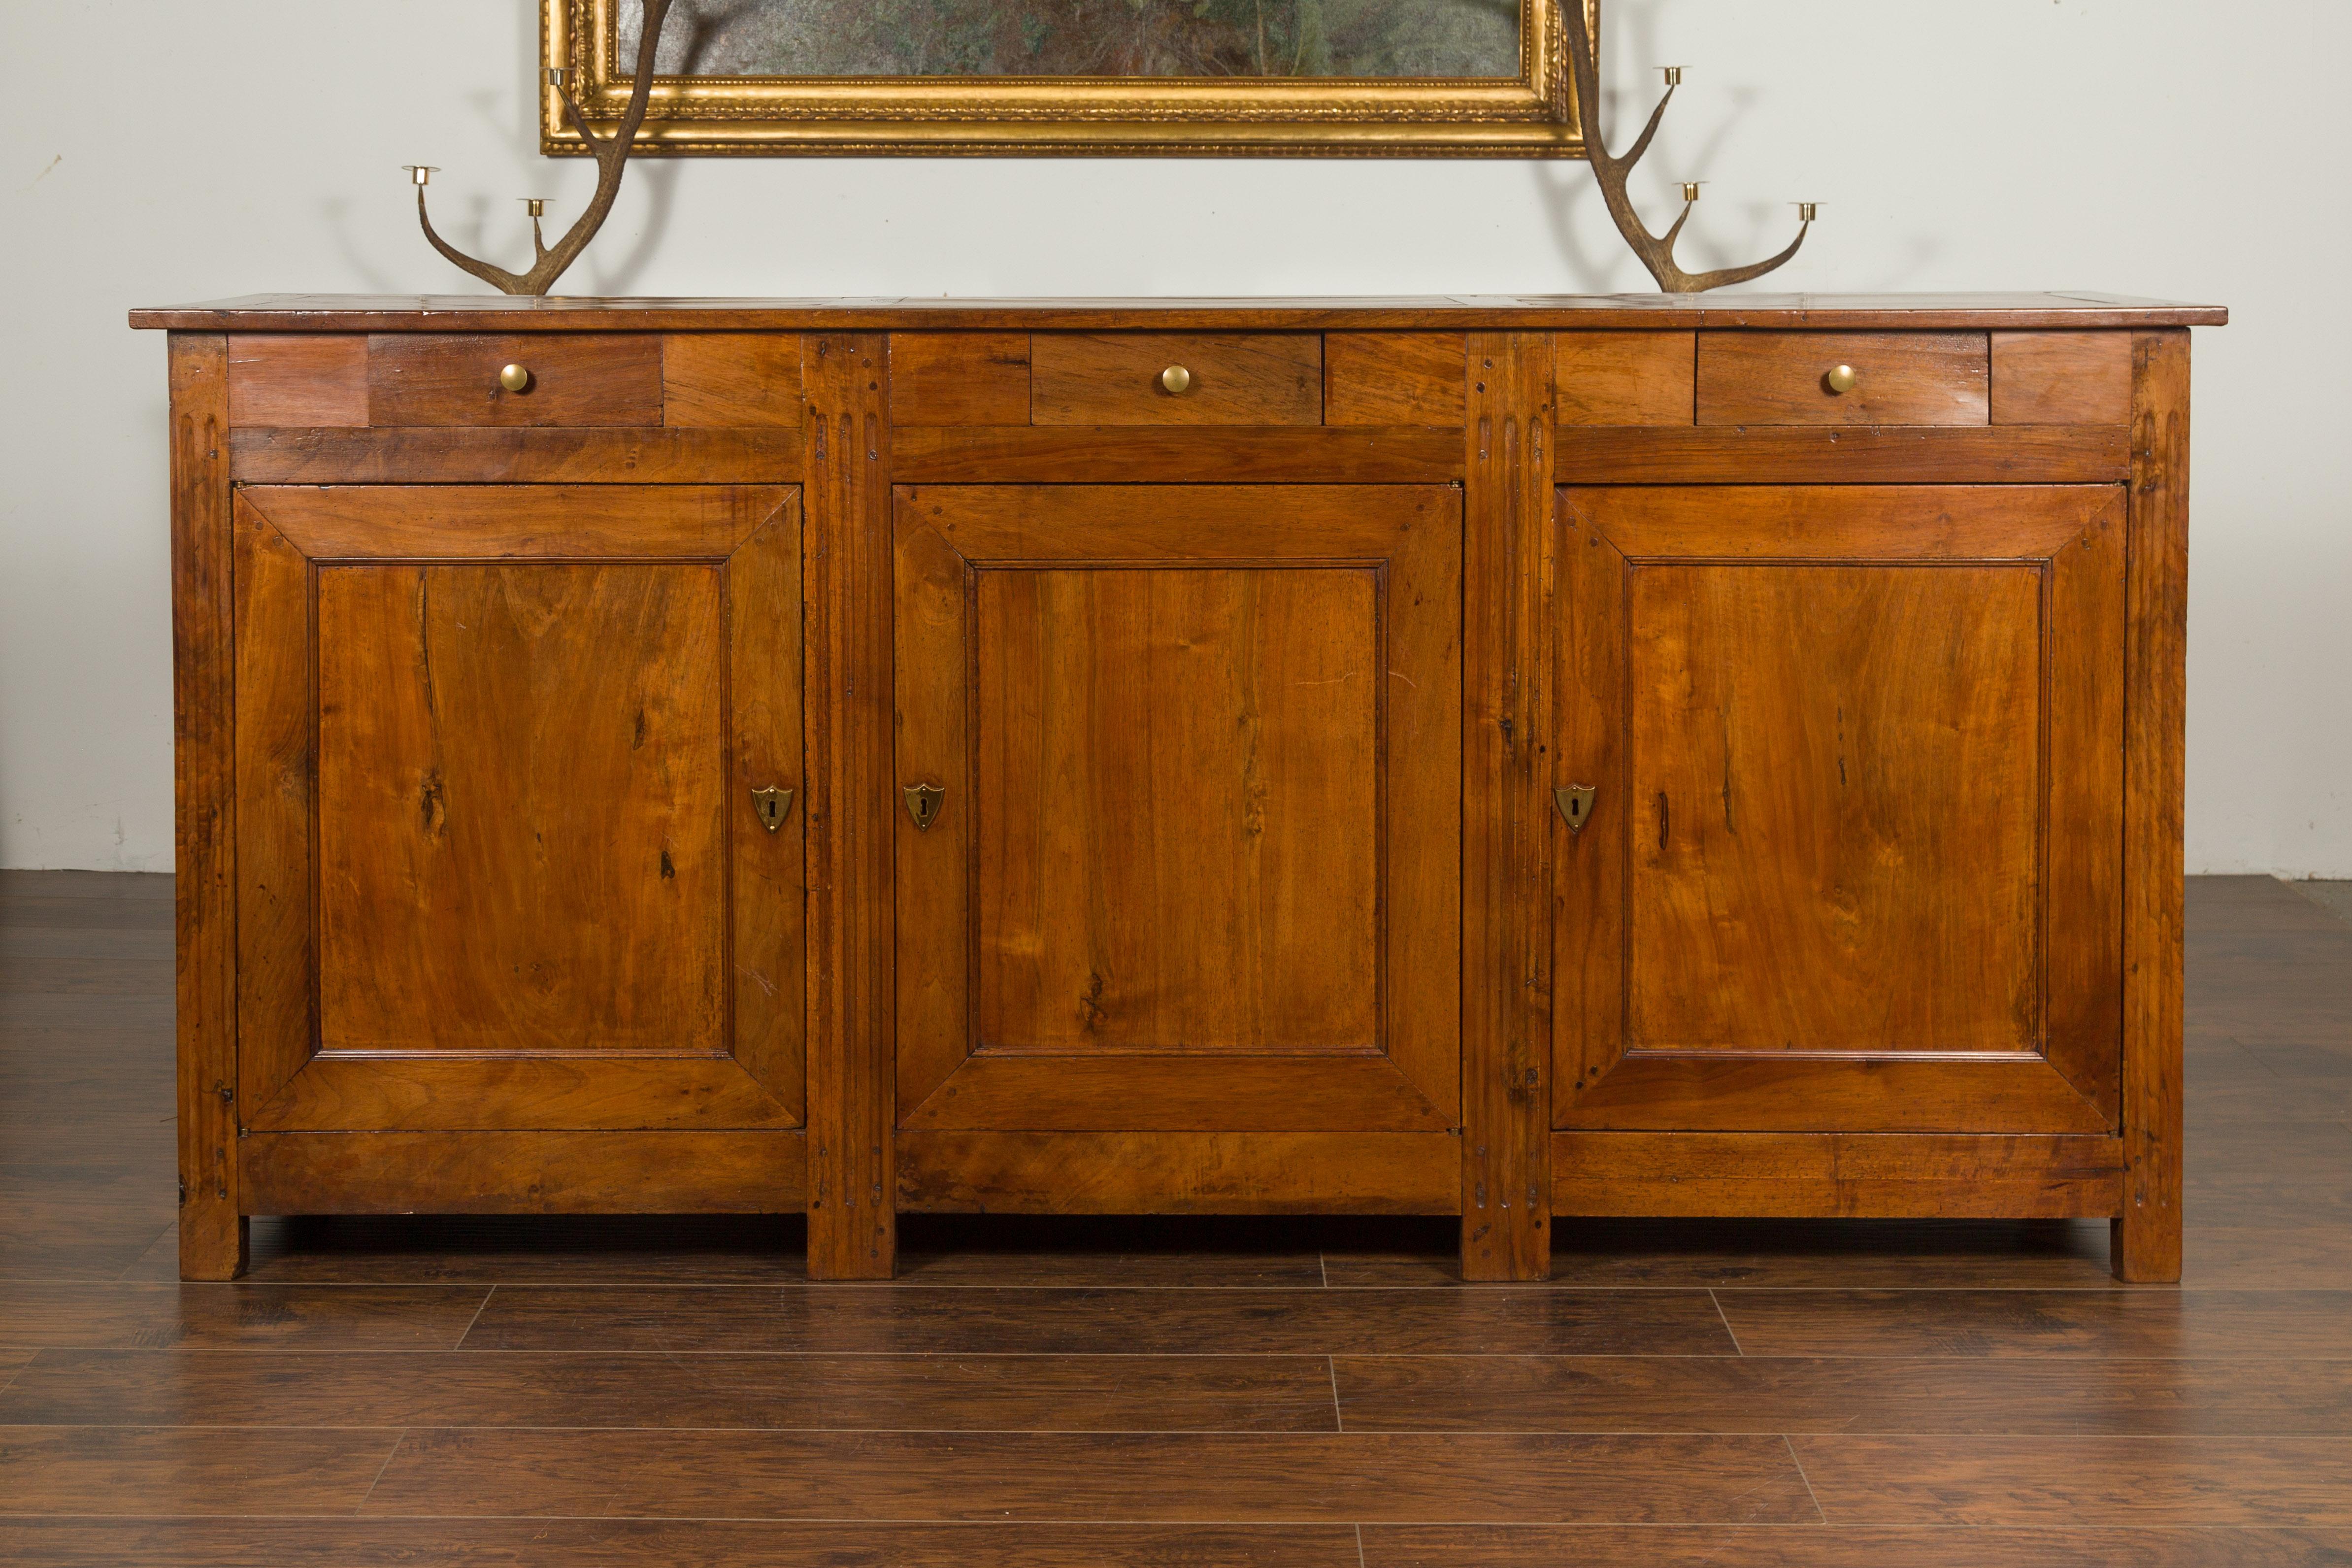 A French Napoleon III period walnut enfilade from the late 19th century, with three drawers over three doors. Created at the end of France's last emperor's reign, this walnut enfilade features a rectangular top divided into three sections, sitting